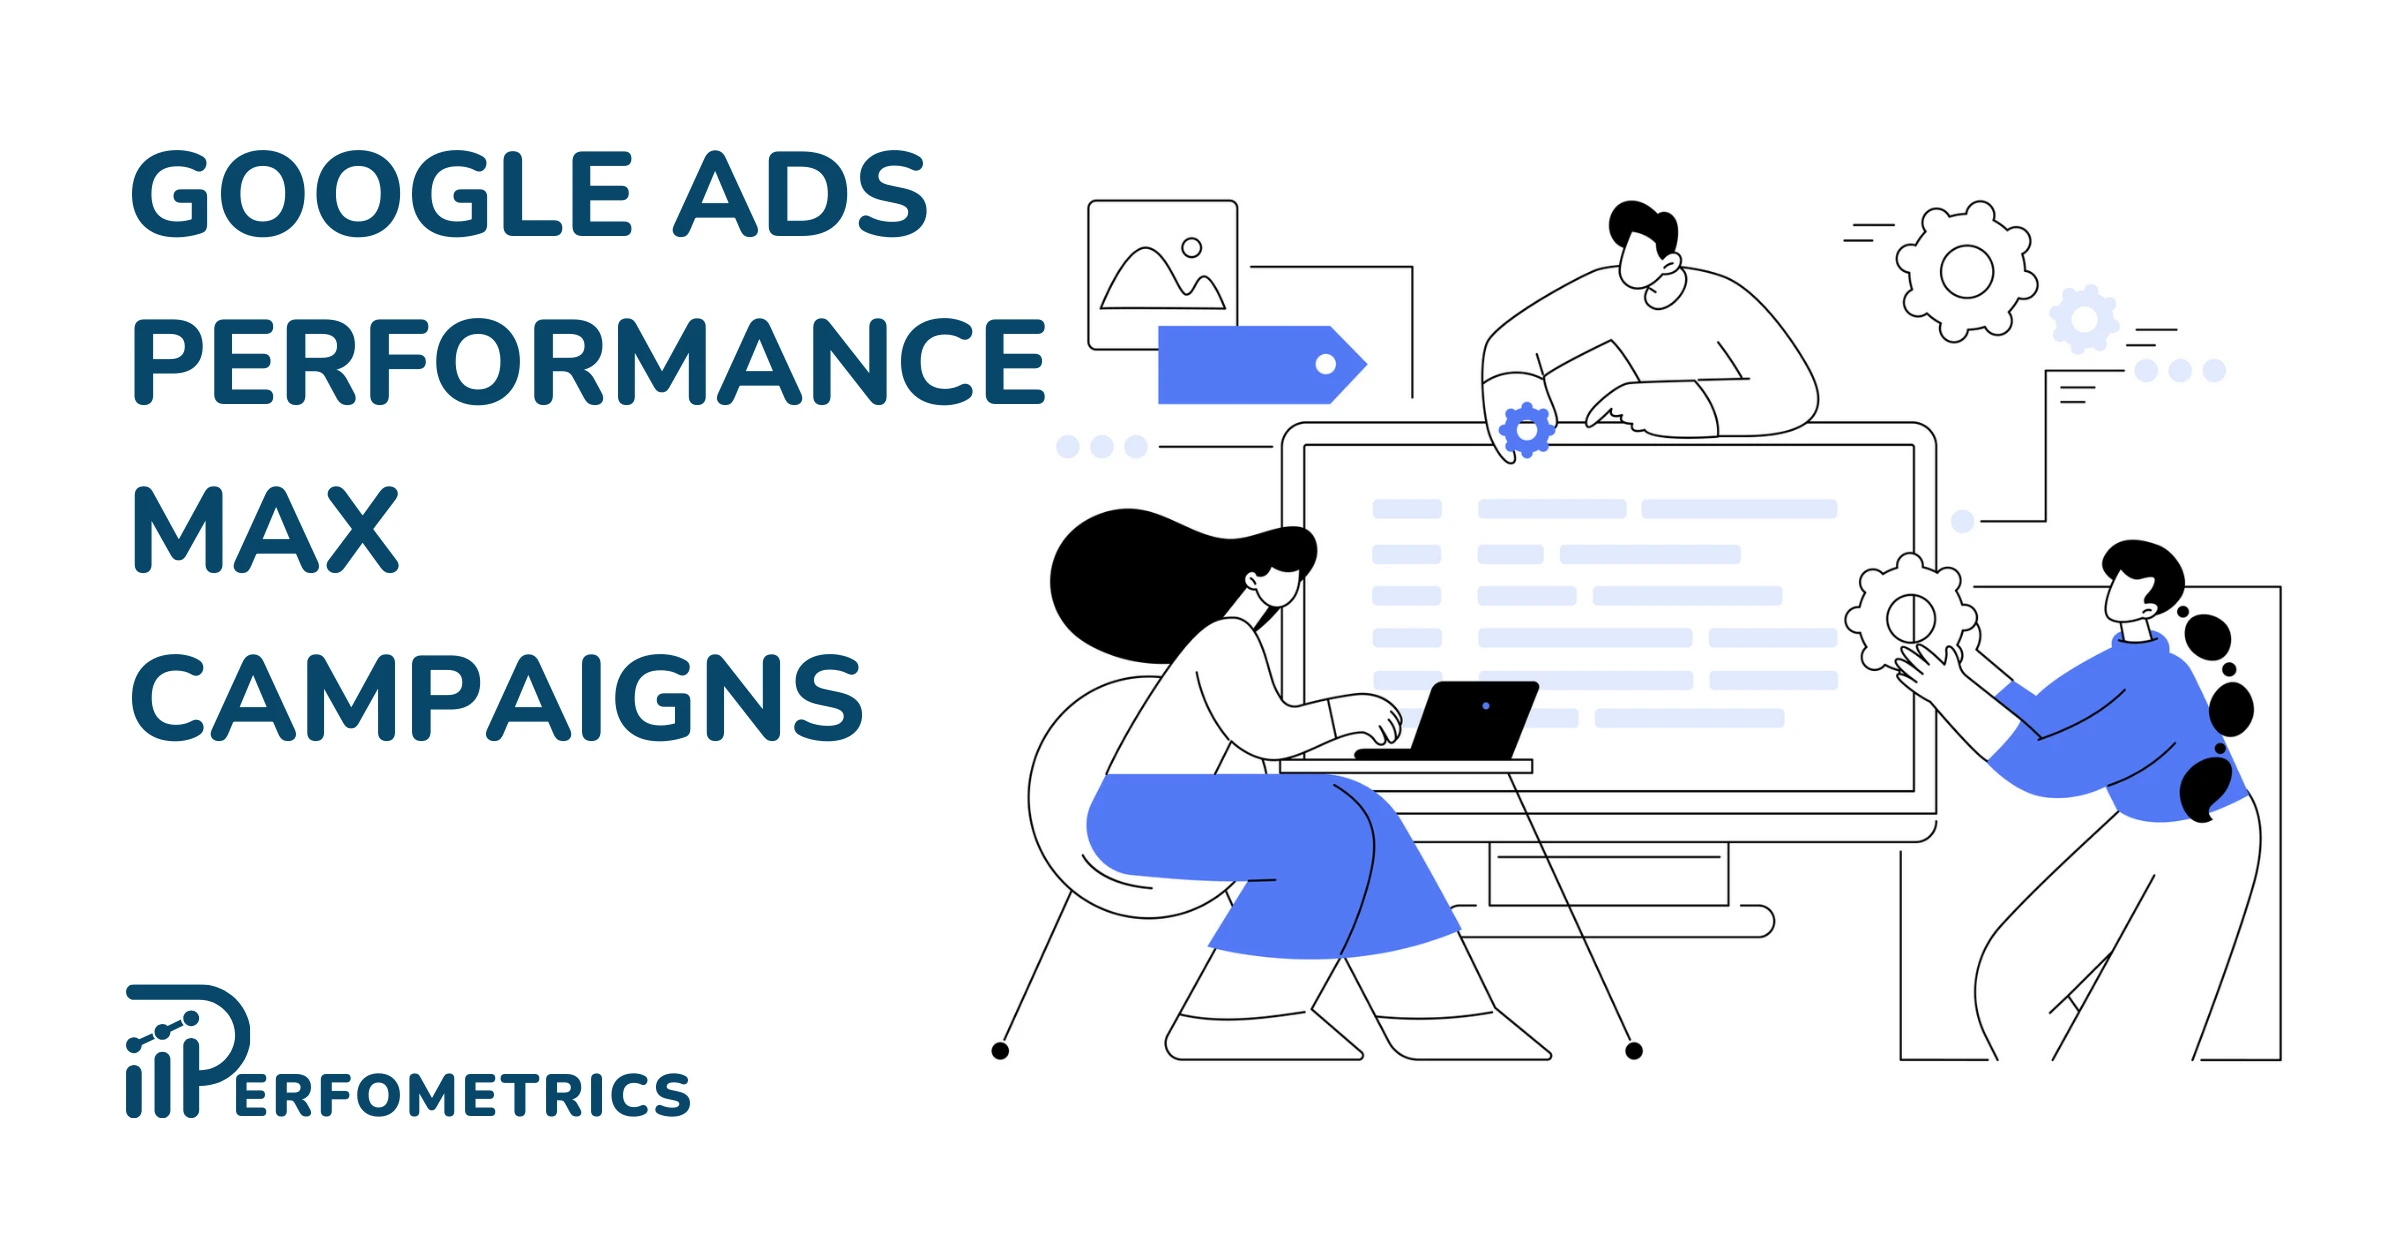 Performance Max Campaign in Google Ads